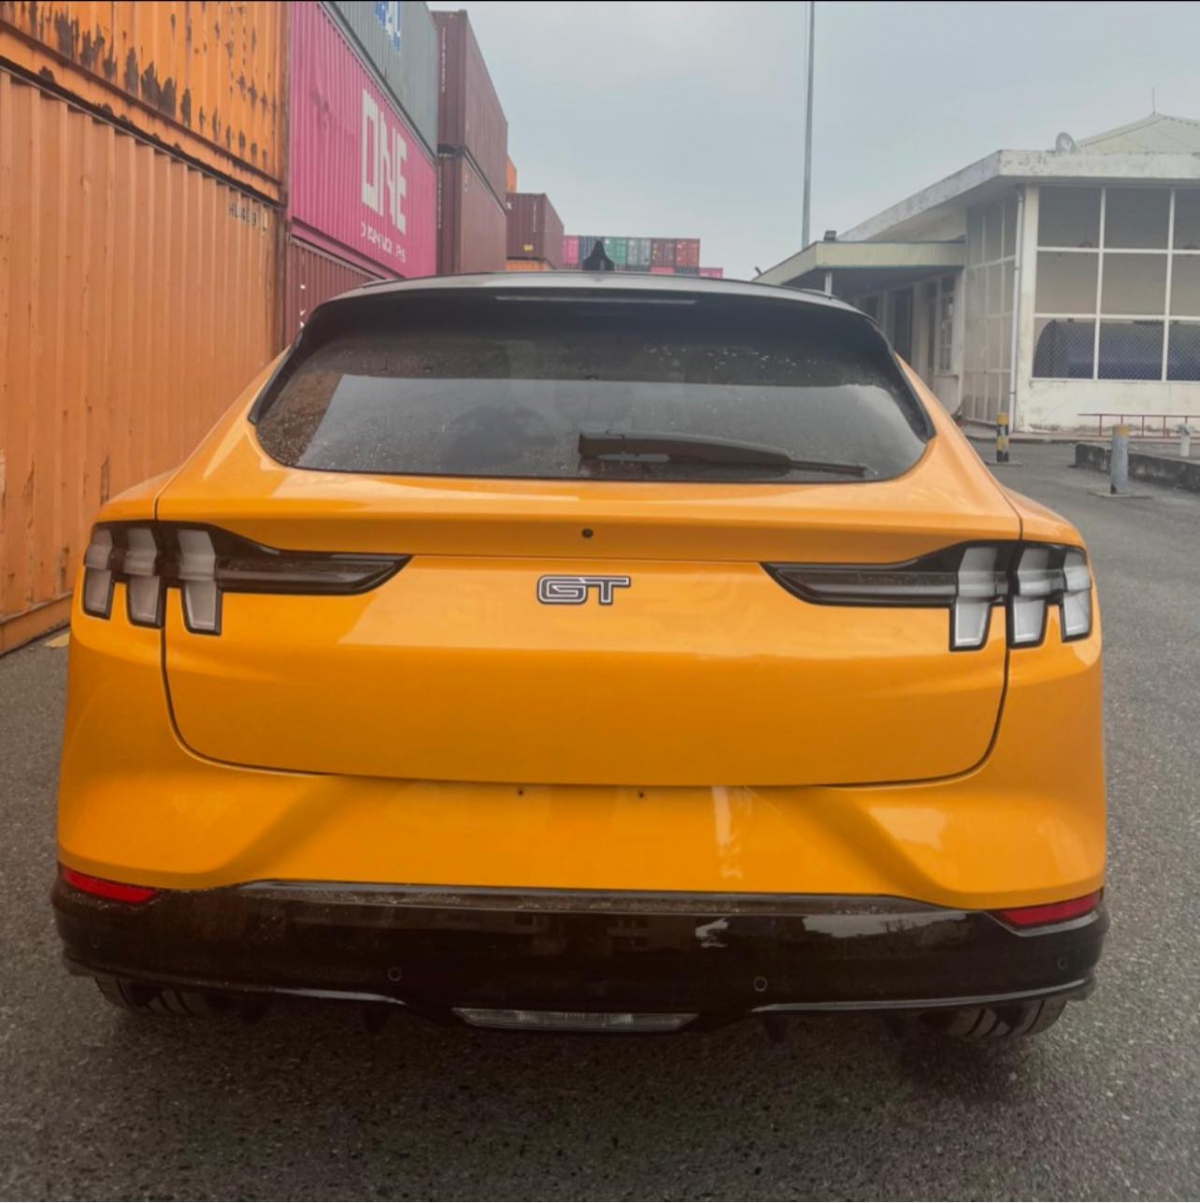 can canh xe dien ford mustang mach-e gt ve viet nam hinh anh 2